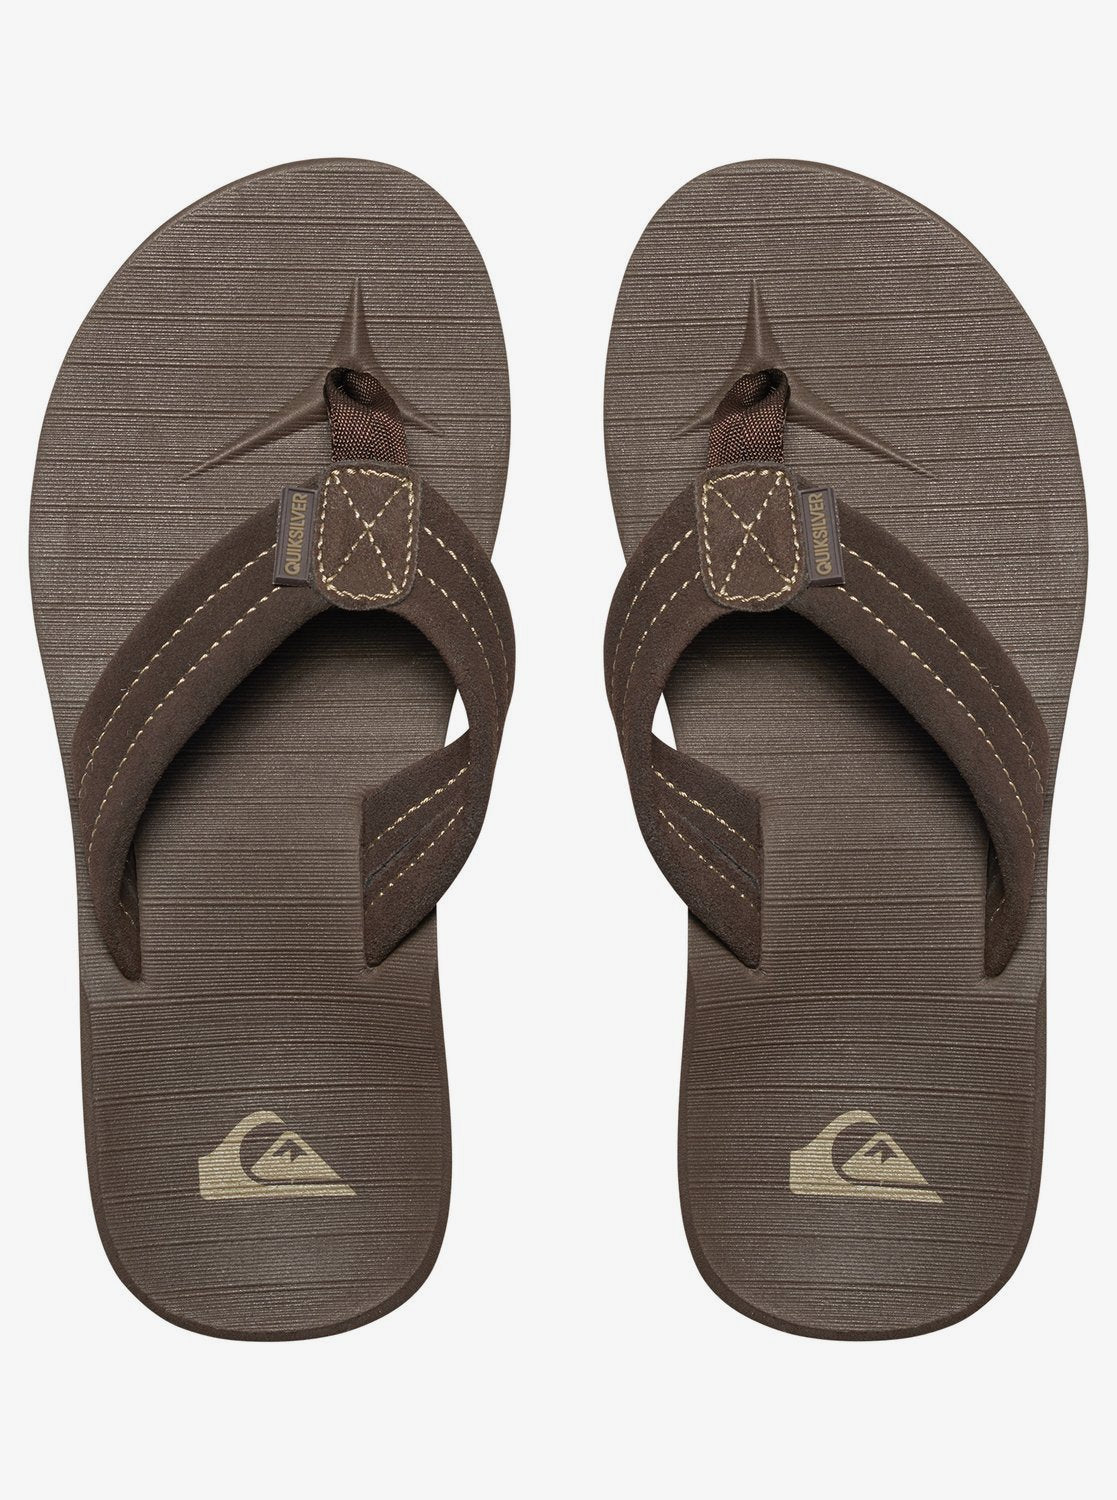 Quiksilver boys CARVER SUEDE YOUTH Sandal 